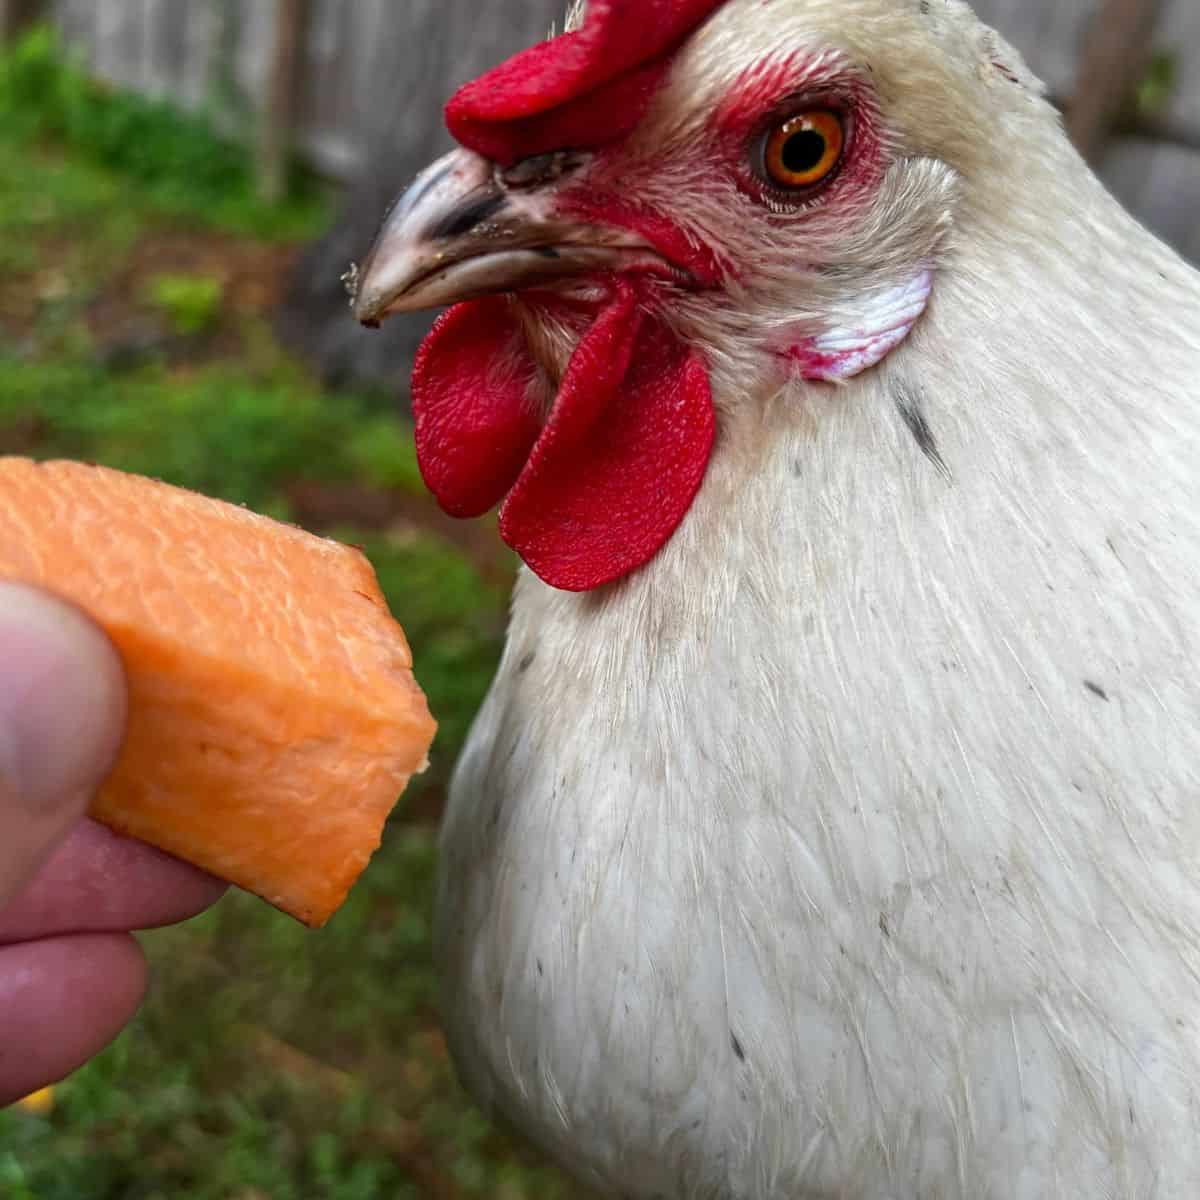 Chicken being held next to a chunk of sweet potato.